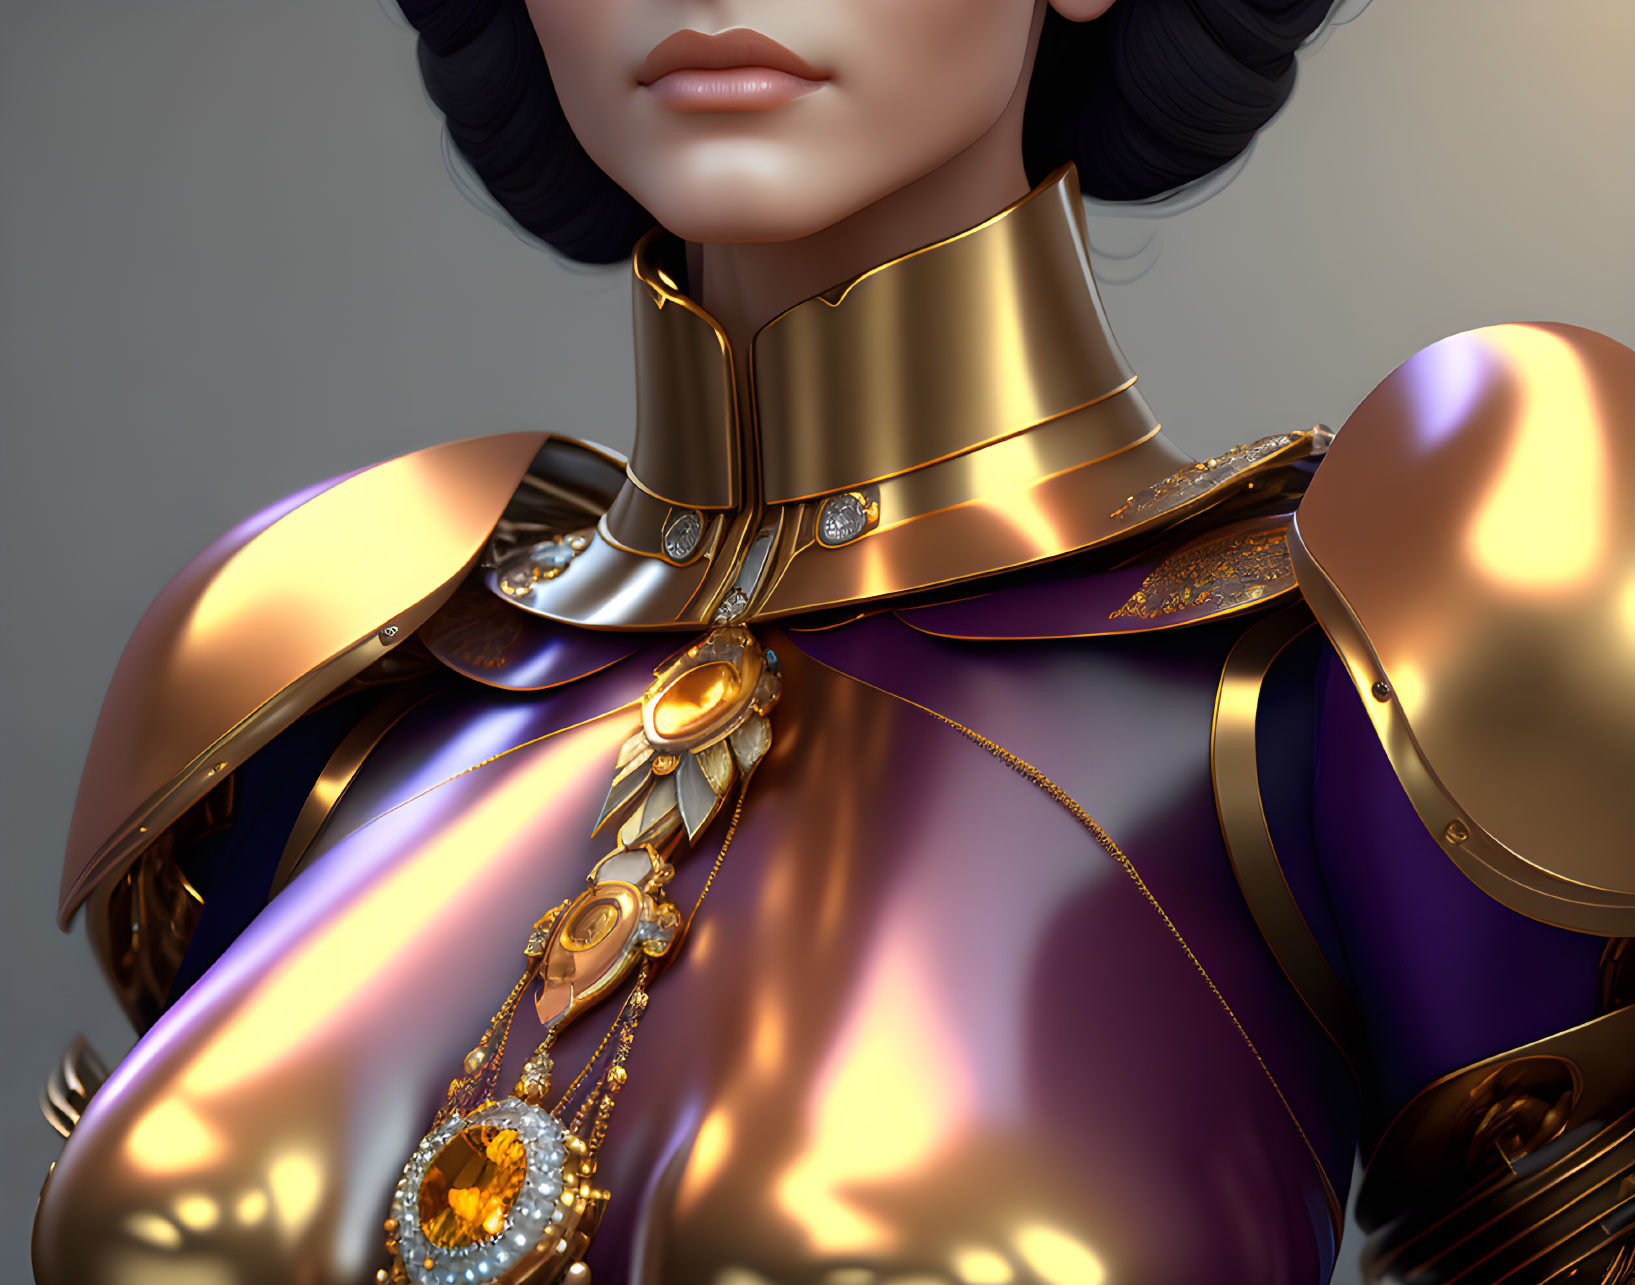 Detailed digital art: Individual in golden armor with purple garment, close-up on shoulder and neck.